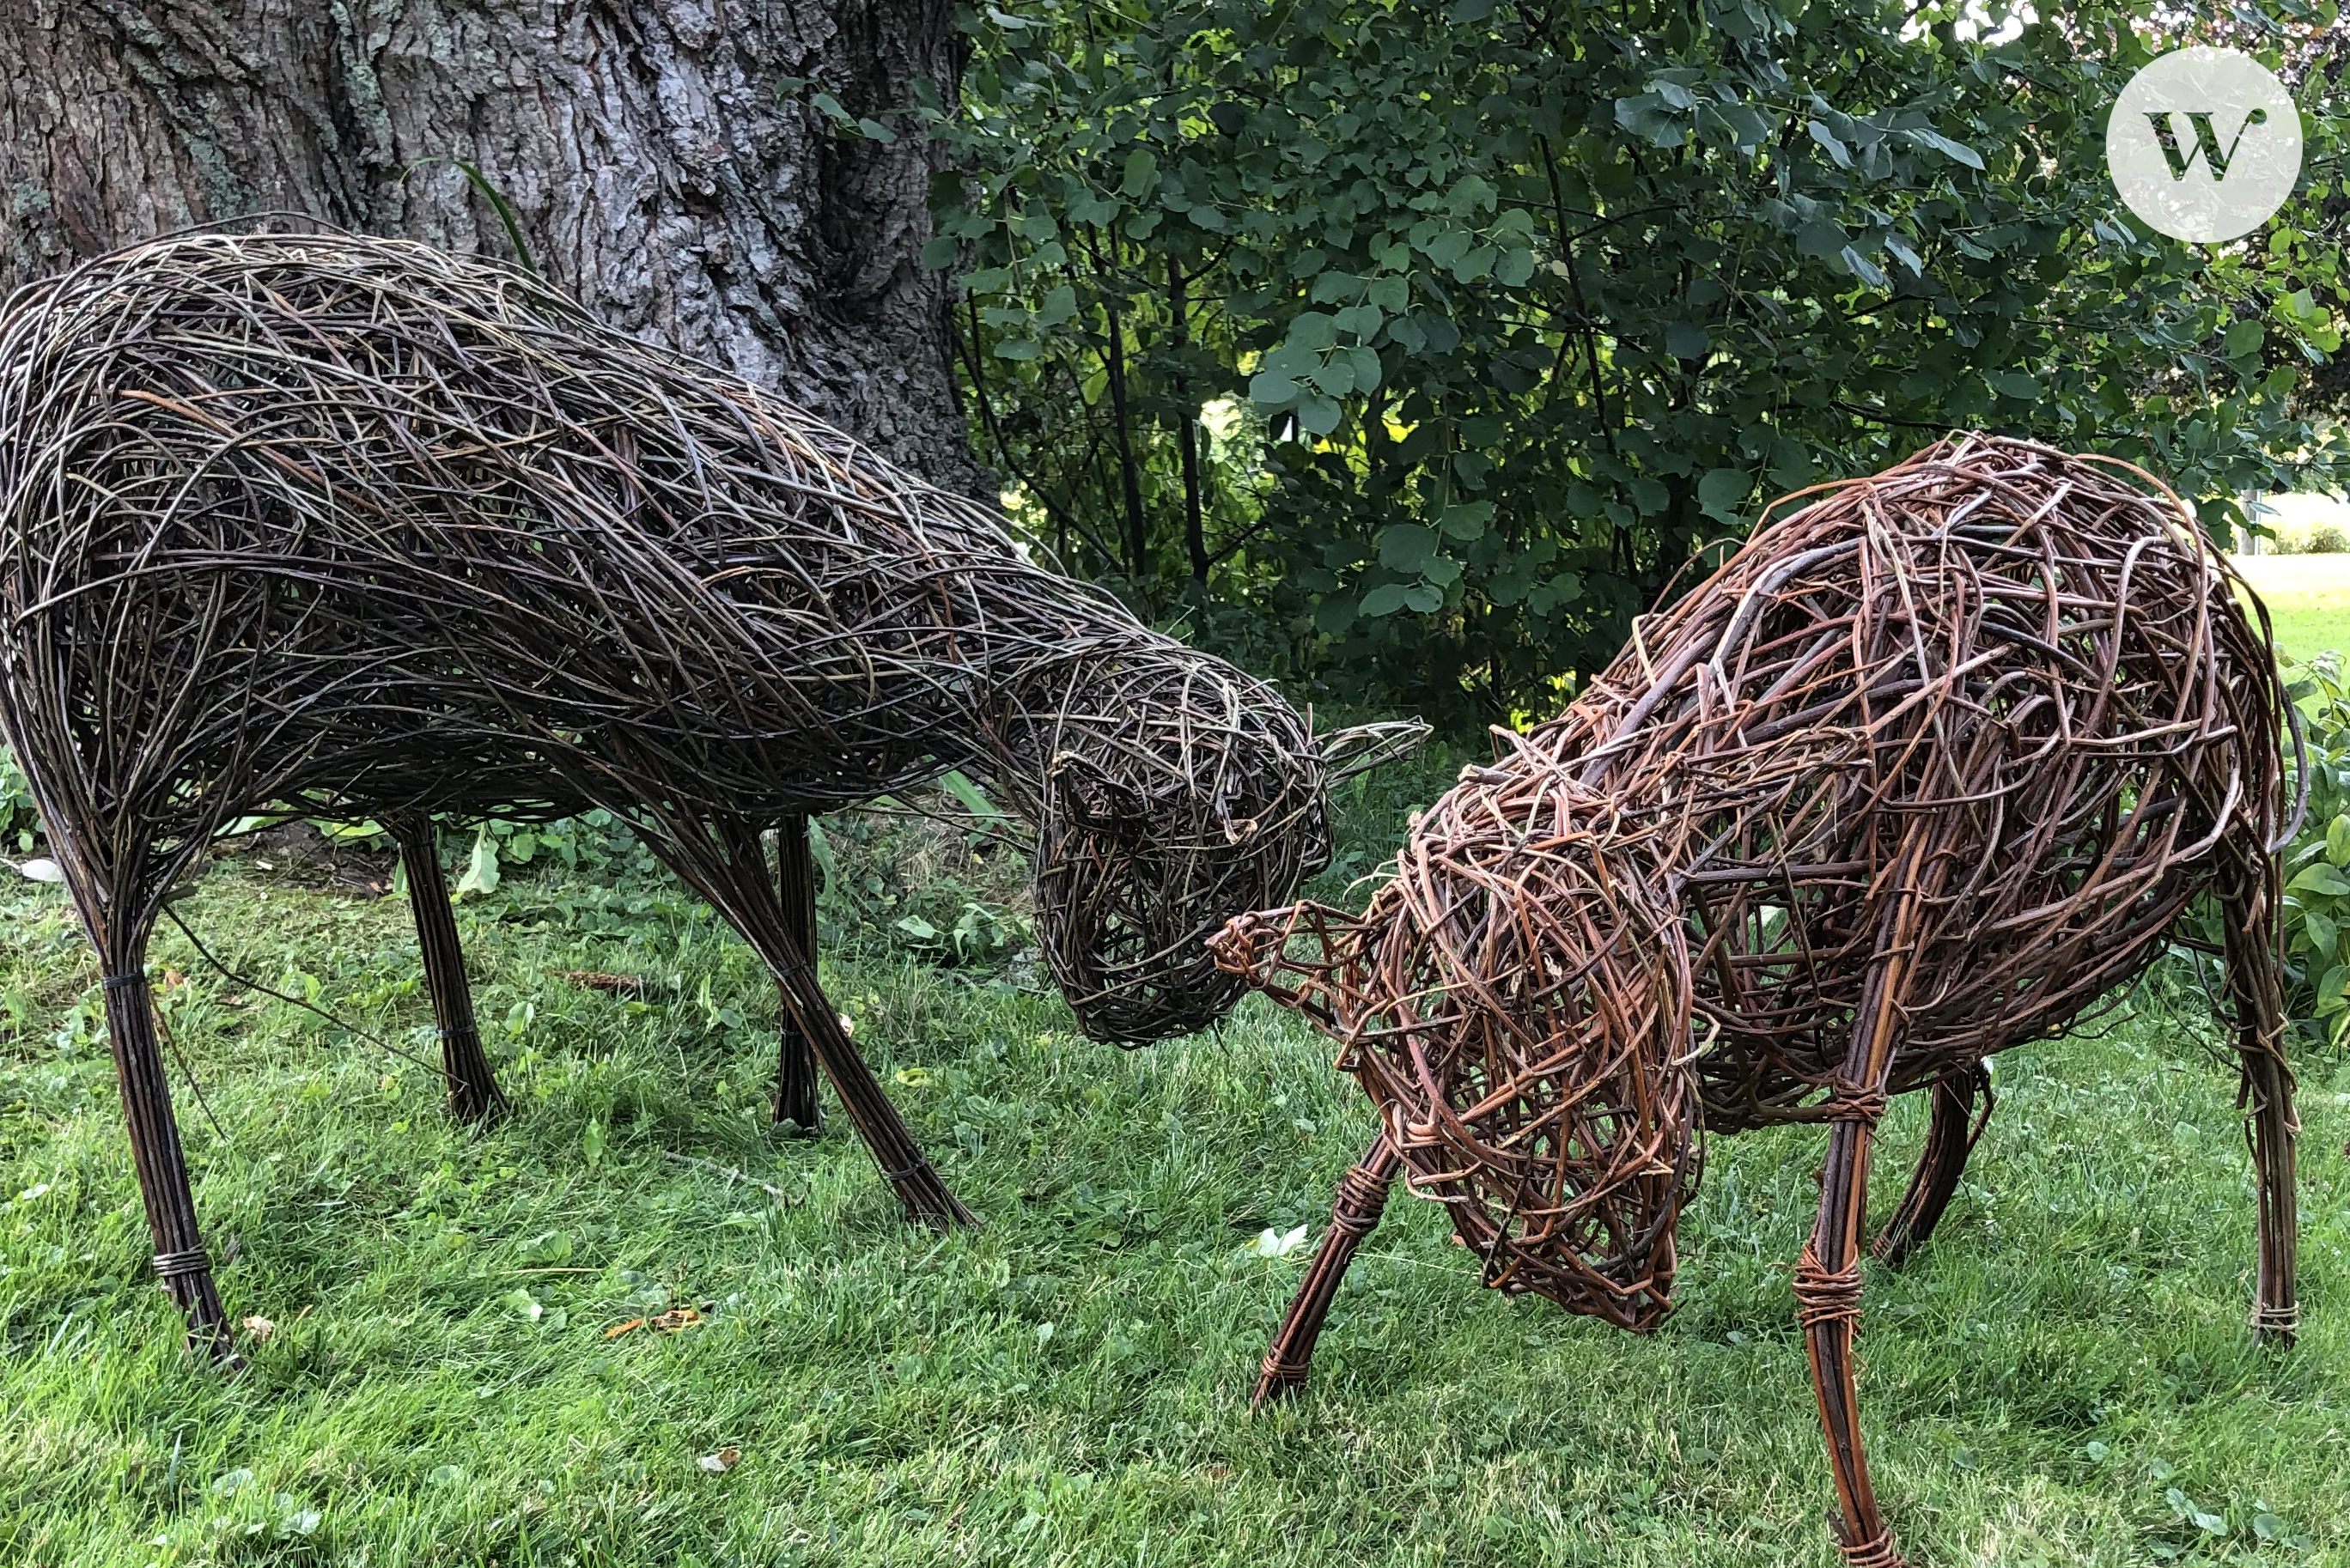 A photograph of two large deer sculptures made of willow.